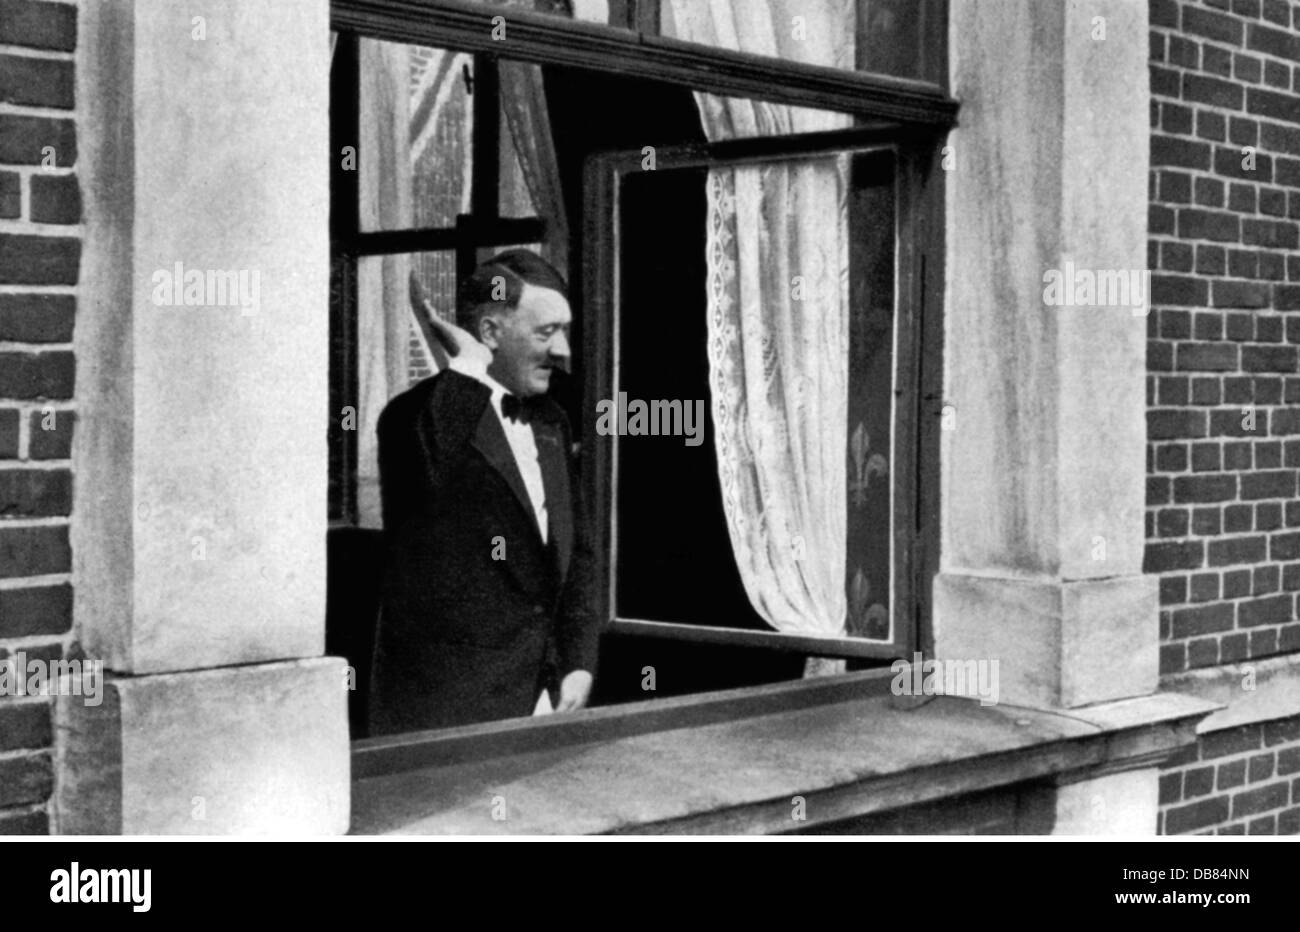 Hitler, Adolf, 20.4.1889 - 30.4.1945, German politician (NSDAP), Chancellor of the Reich 30.1.1933 - 30.4.1945, at the Richard Wagner festival  in Bayreuth, greeting out of the window of the festival hall, circa 1935, Stock Photo